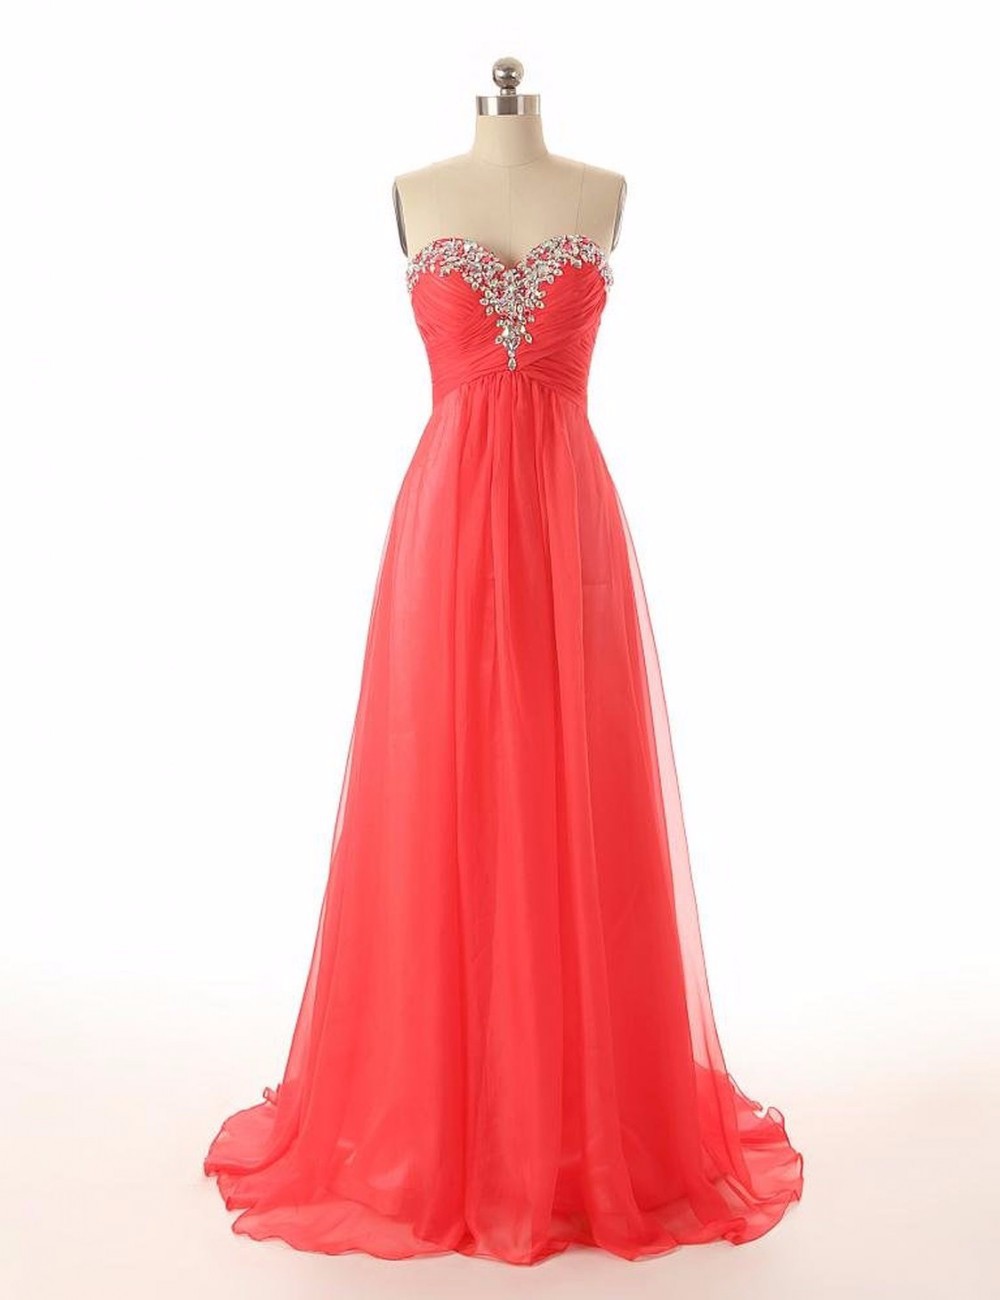 Sexy Custom Made Prom Dresses Sweetheart Chiffon Party Gowns Beading Crystal Pleat Vintage Evening Dress